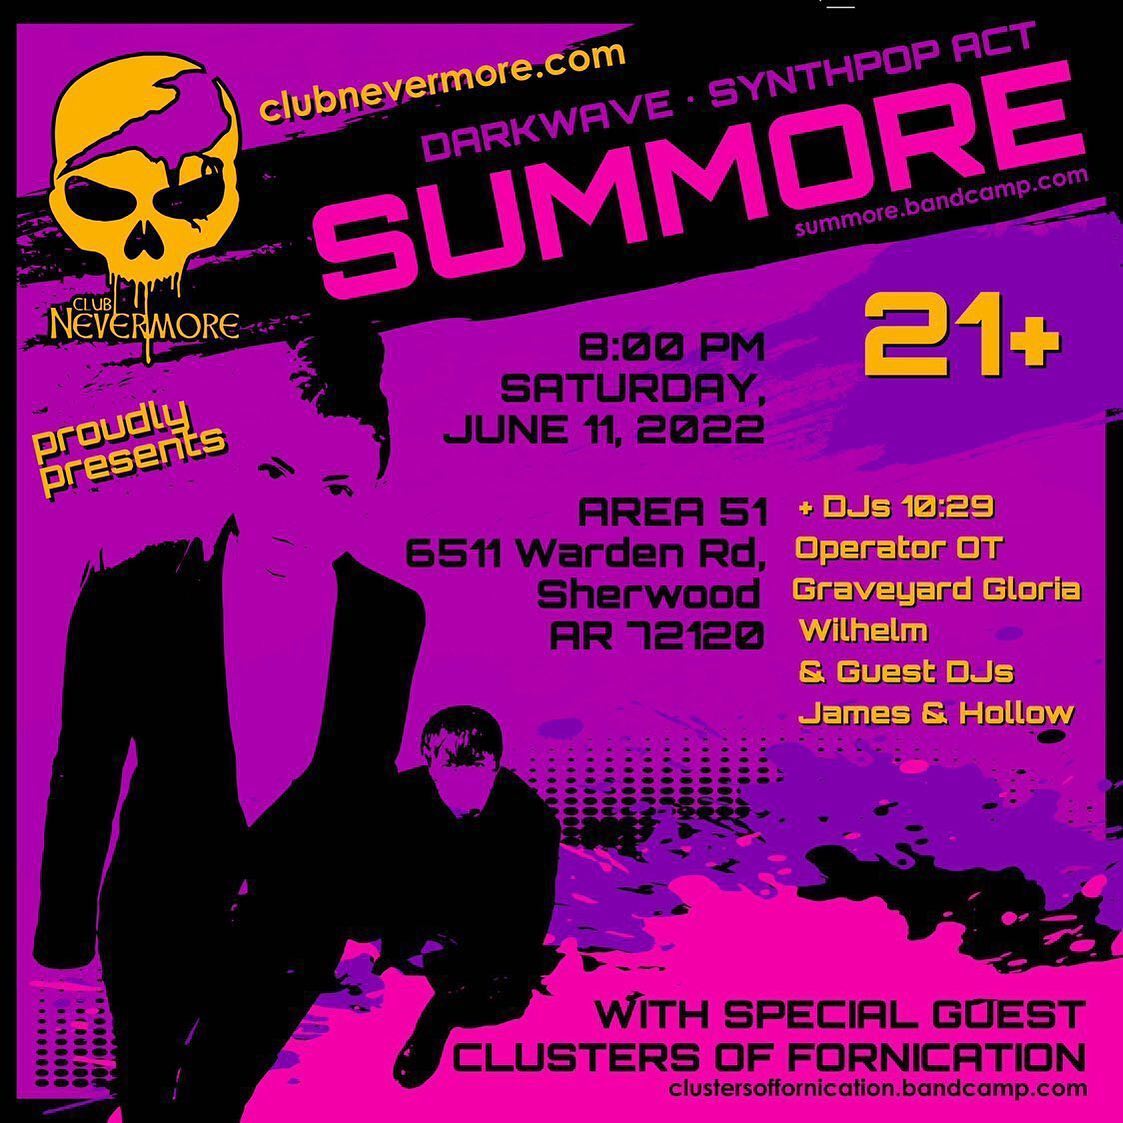 This is a flyer for Club Nevermore&rsquo;s June event. The background is a neon pinkish-purple color. There is a skull with a raven in the upper left corner and the text says &lsquo;Club Nevermore proudly presents darkwave synthpop act Summore with special guest Clusters of Fornication, plus DJs 10.29, Graveyard Gloria, Operator OT, Wilhelm, and guest DJs Hollow and DJ James. At Area 51, 6511 Warden Road in Sherwoood, Arkansas. Saturday, June 11, 2022. Doors open at 8 PM, ages 21+ up. More info at clubnevermore.com.